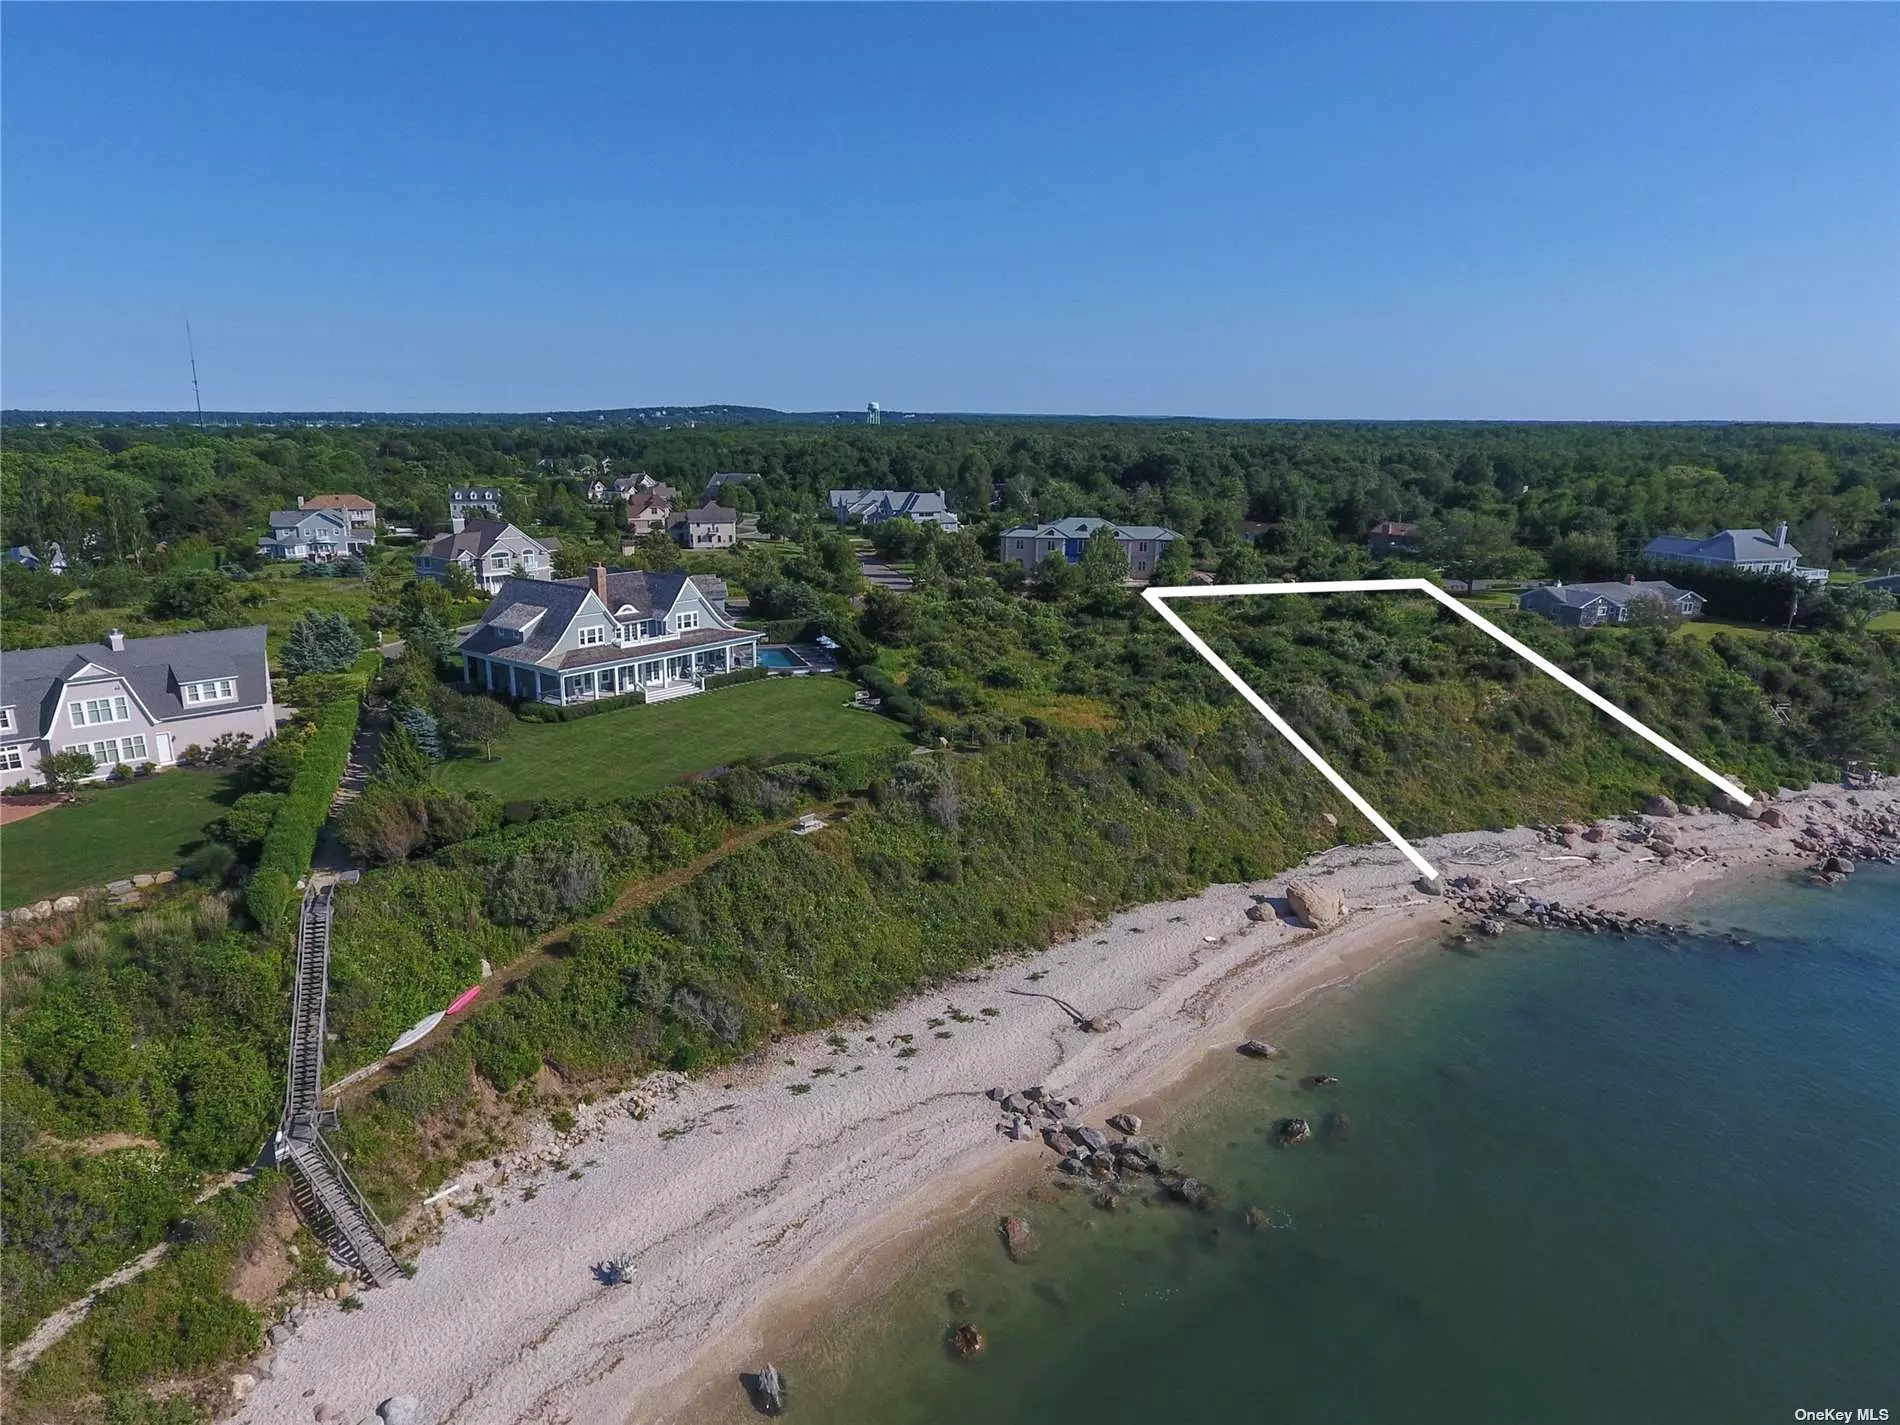 Greenport, Rock Cove Estates--One of only two sound front lots available in this premier, well-established community. 1.06 acres level parcel with sweeping water views across the LI Sound to the Connecticut shoreline. Extraordinary sunsets. 152 feet of private sound beach. Build the home of your dreams to enjoy the gentle sea breezes and the sound of waves hitting the shore. An enclave of beautiful homes amidst the bucolic North Fork Wine Country. Greenport Village is just a bike ride away. Vineyards, farm stands, shops and restaurants. A prime location that has it all. This is it, and it&rsquo;s waiting for you.